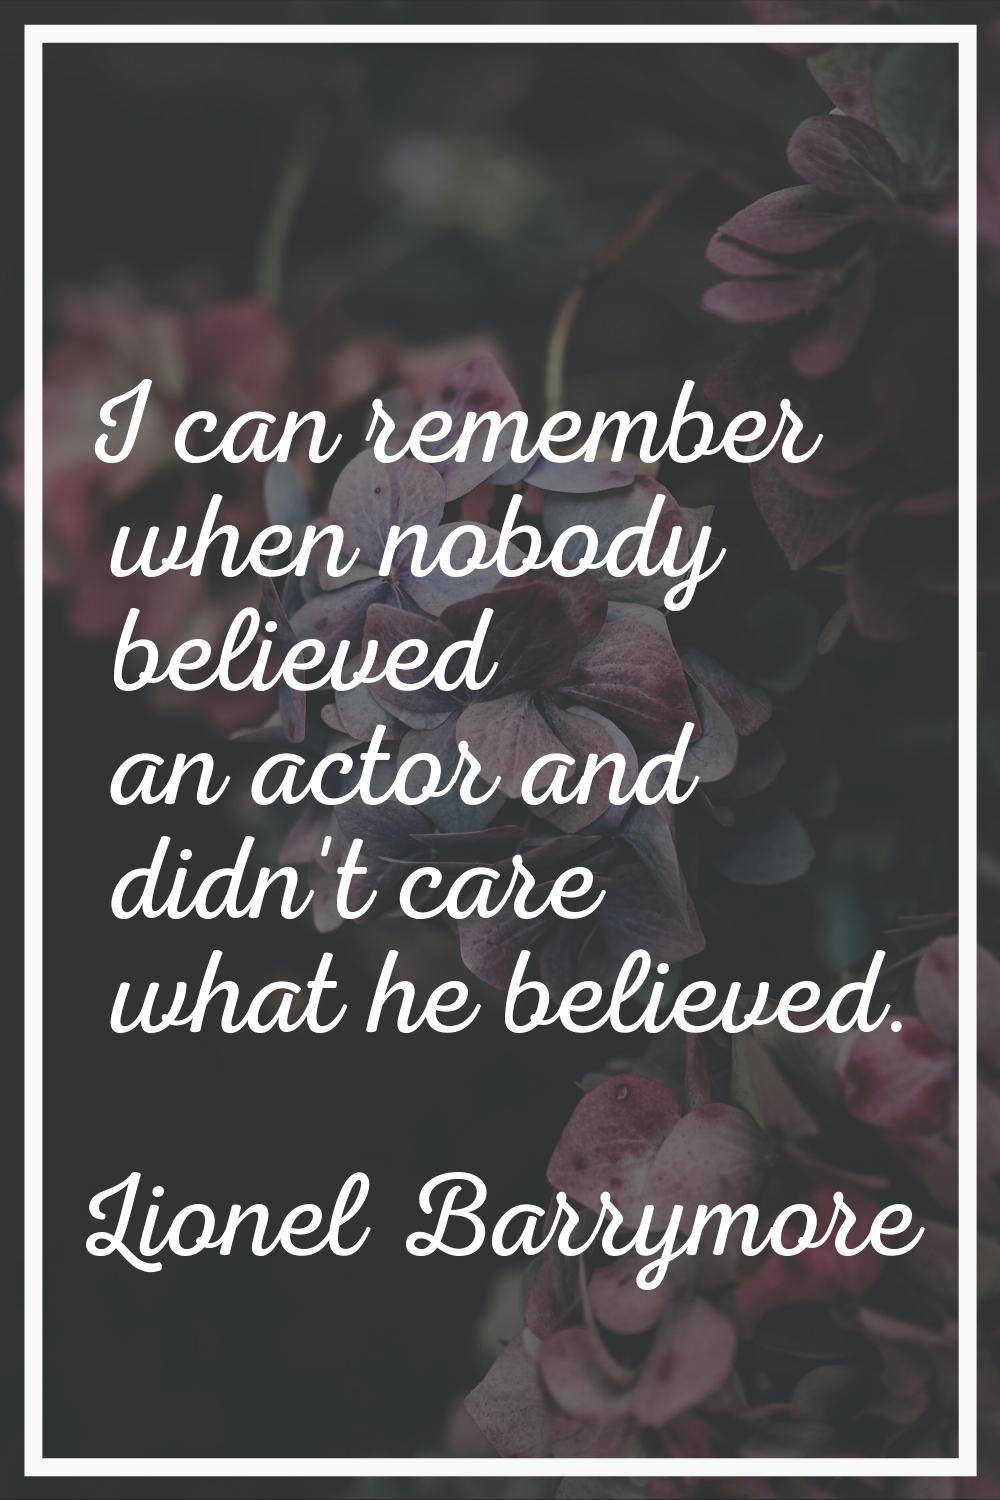 I can remember when nobody believed an actor and didn't care what he believed.